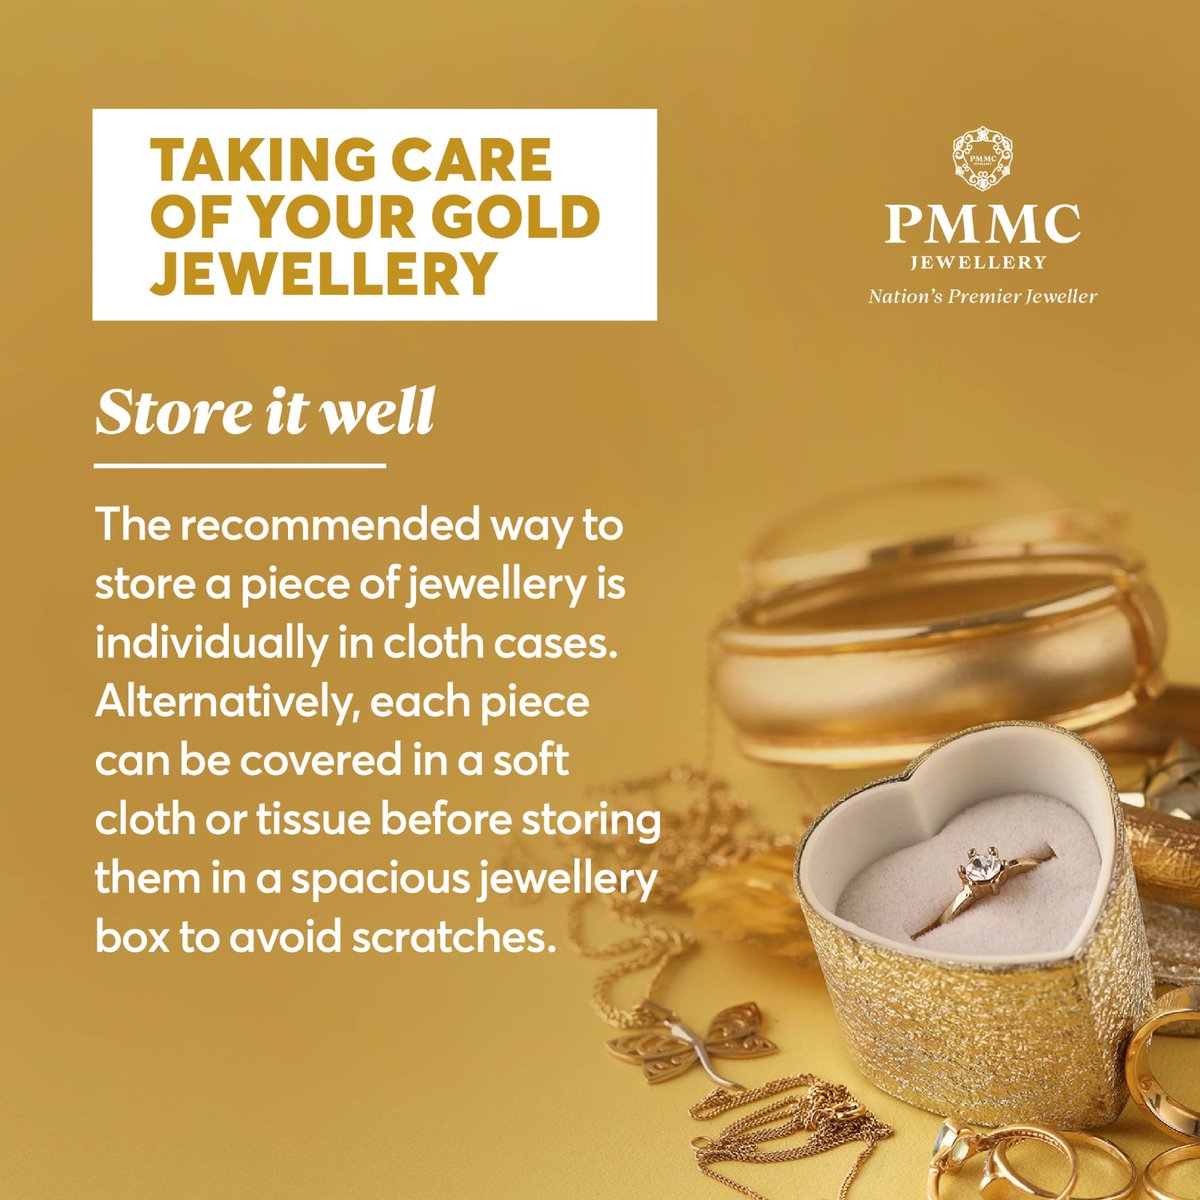 Precious Jewellery Care Tips. Store it well in cloth cases to avoid scratches. 

#PMMCJewellery #NationsPremierJeweller #JewelleryCare #MakeThemLast